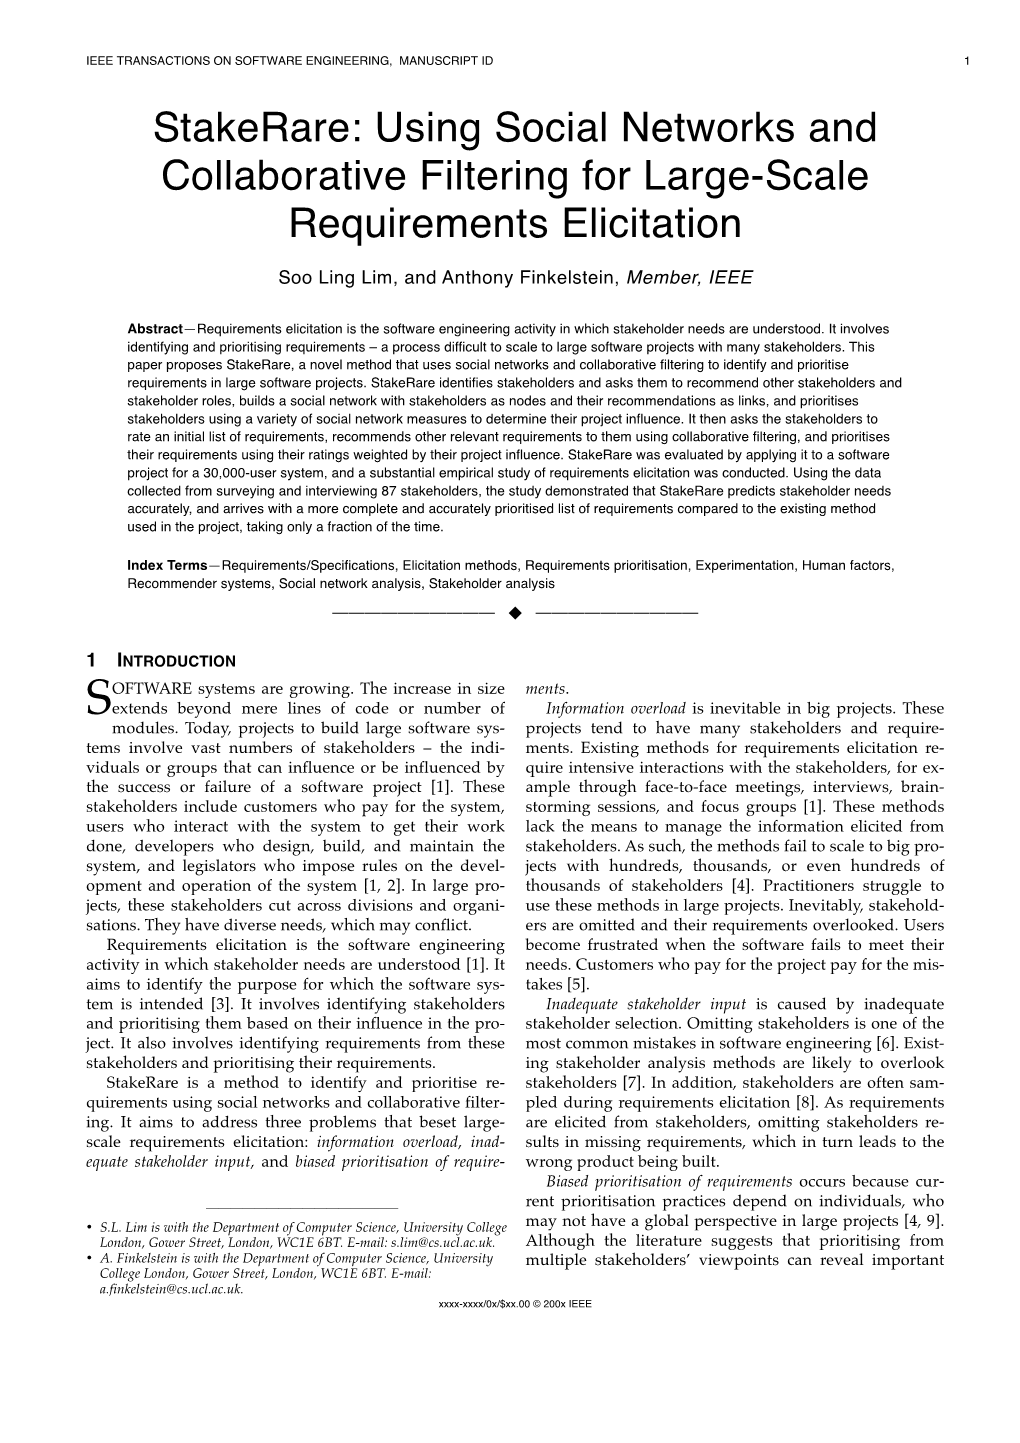 Using Social Networks and Collaborative Filtering for Large-Scale Requirements Elicitation